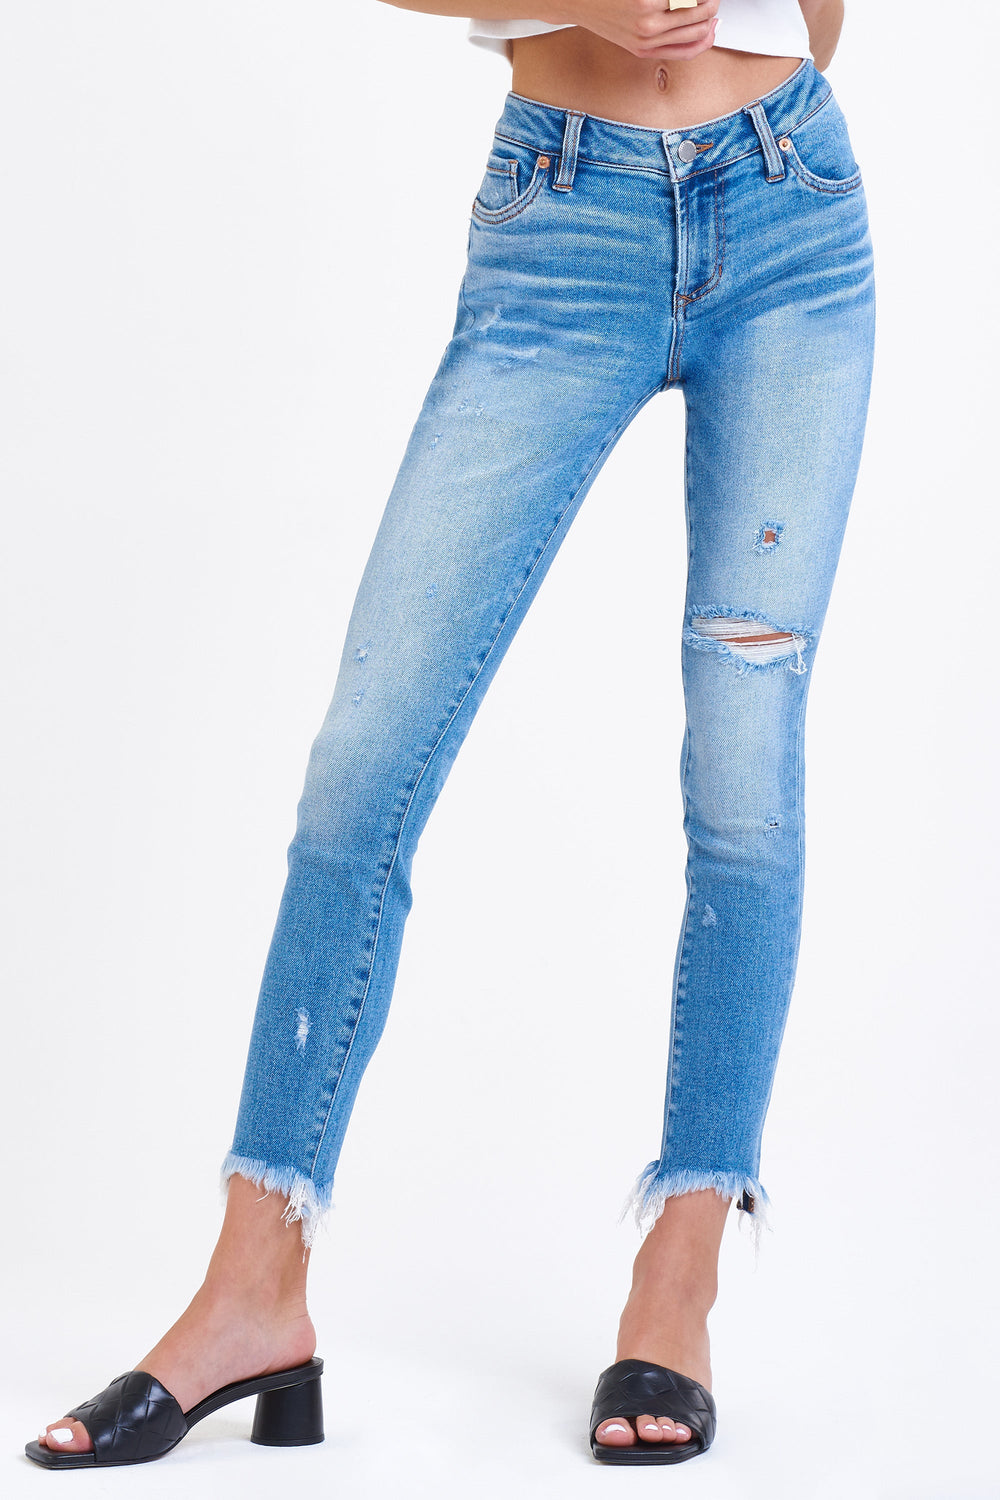 image of a female model wearing a JOYRICH MID RISE ANKLE SKINNY JEANS WALL STREET JEANS